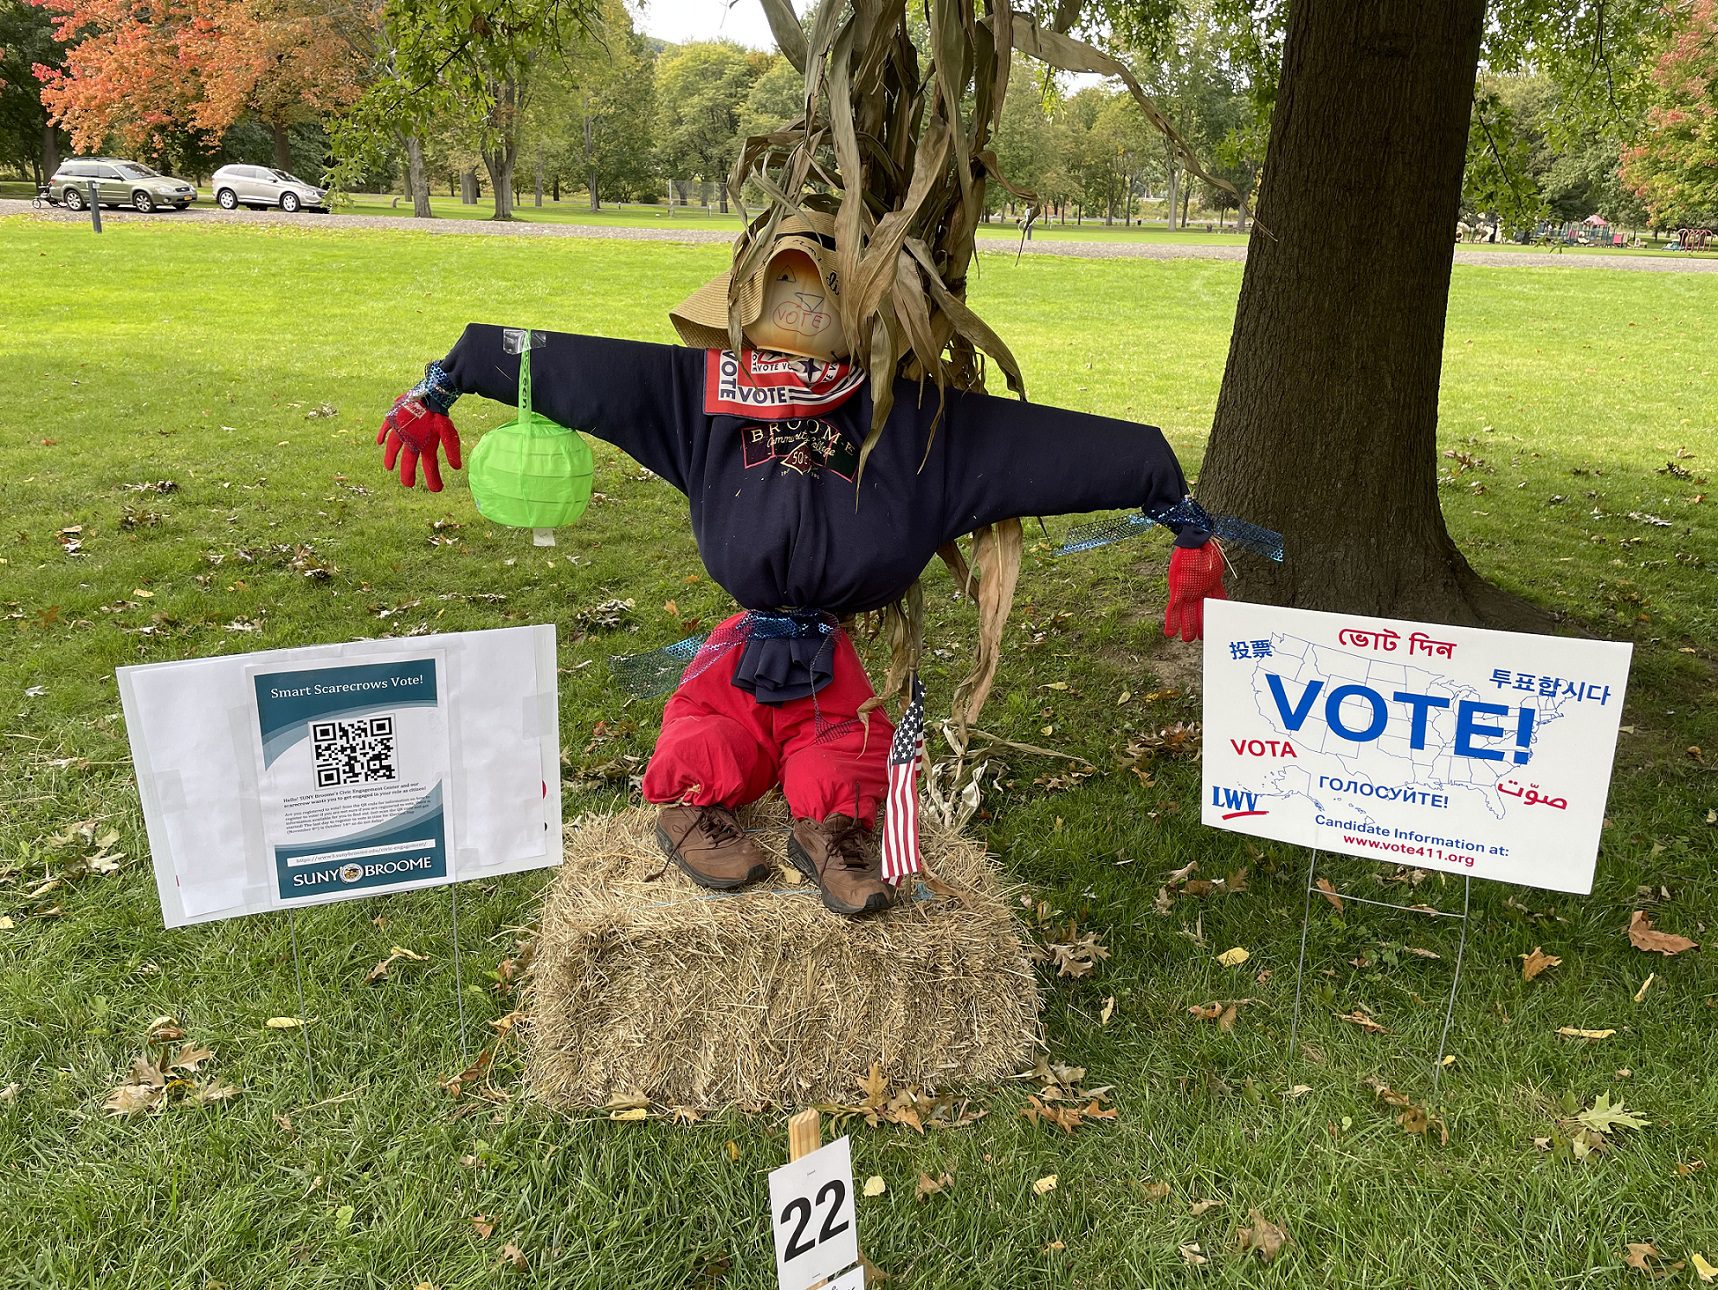 SUNY Broome's Civic Engagement Center "Smart Scarecrows Vote" display at the Otsiningo Park Broome County Scarecrow displays.